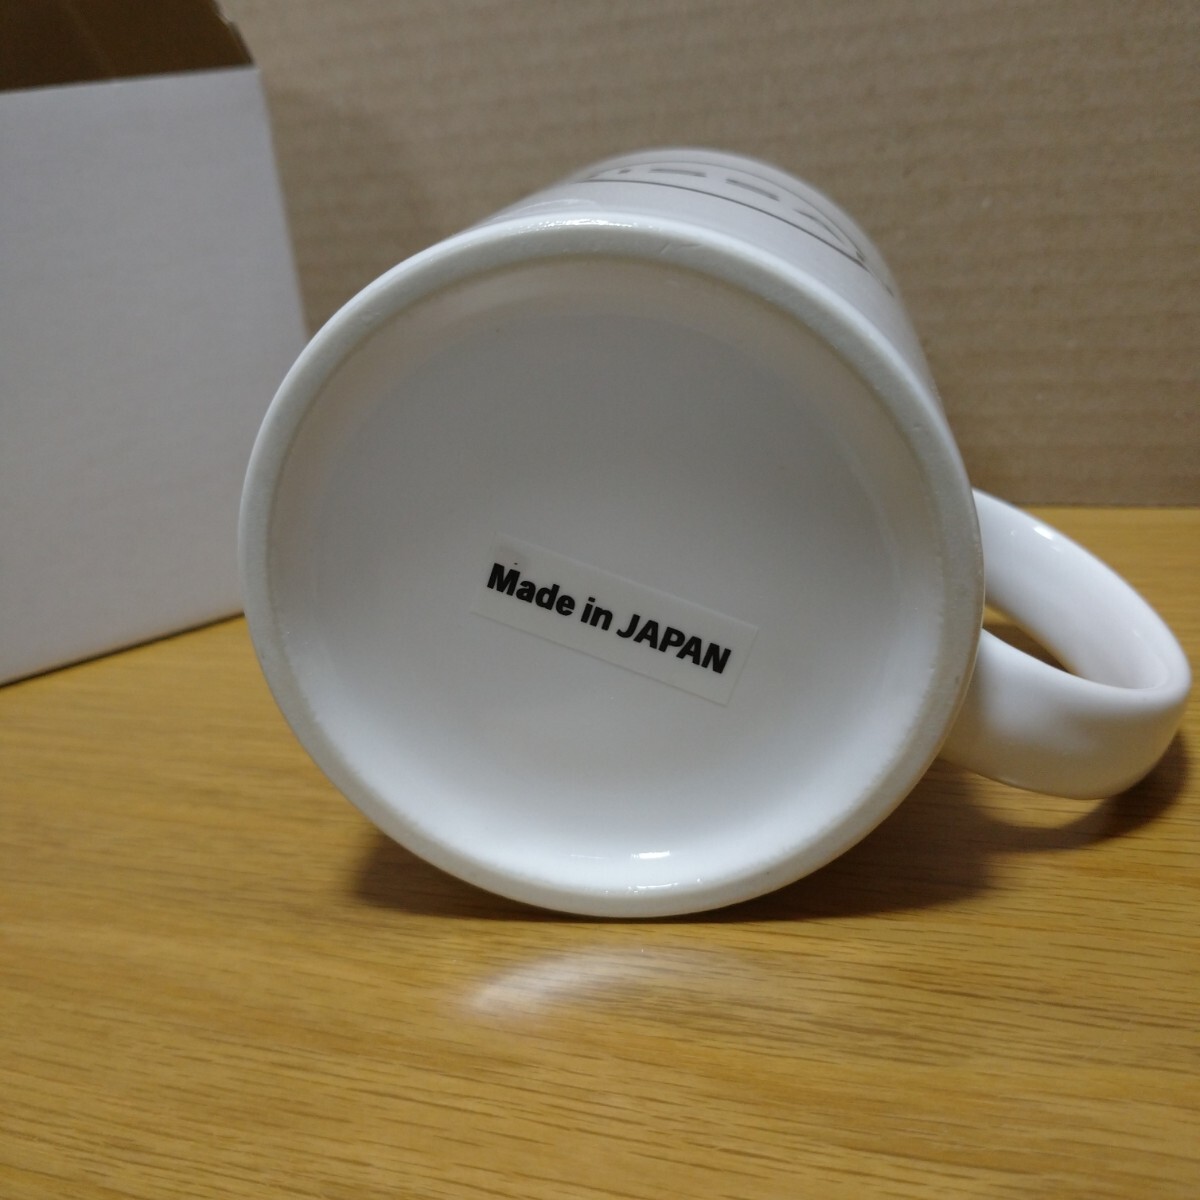 NISSAN 日産 マグカップ カップ コップ グッズ コレクション ロゴ 食器 車 湯呑み マグ 陶器 car limited logo mag cup collection ②_画像8